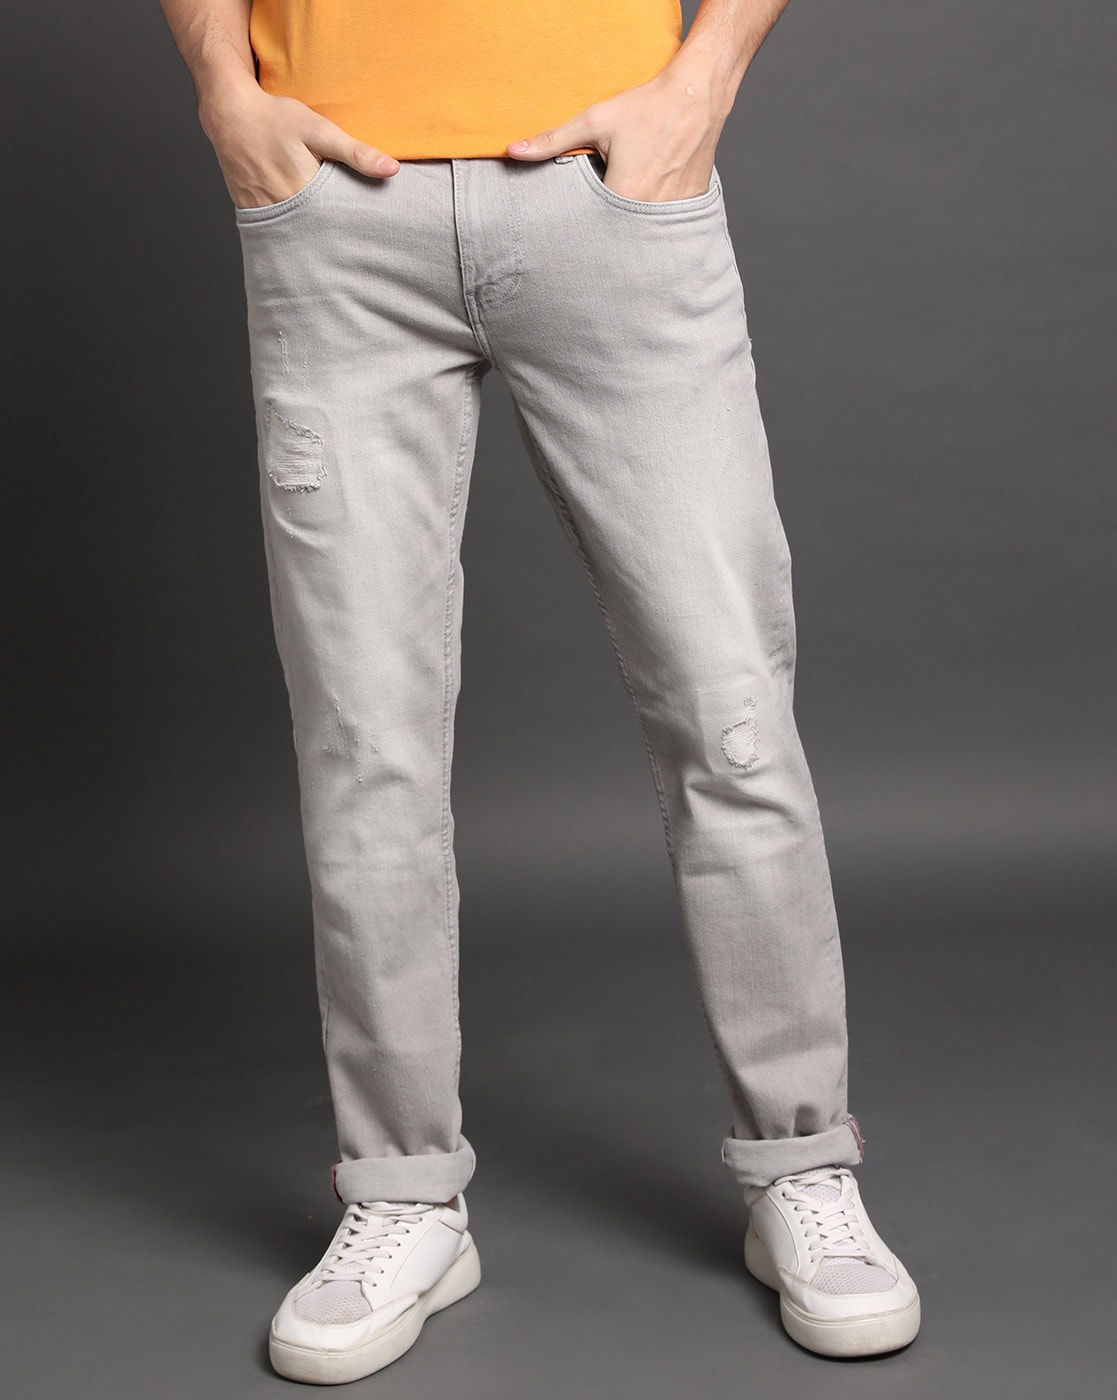 Buy White Super Slim Fit Denim Deluxe Stretch Jeans Online at Muftijeans